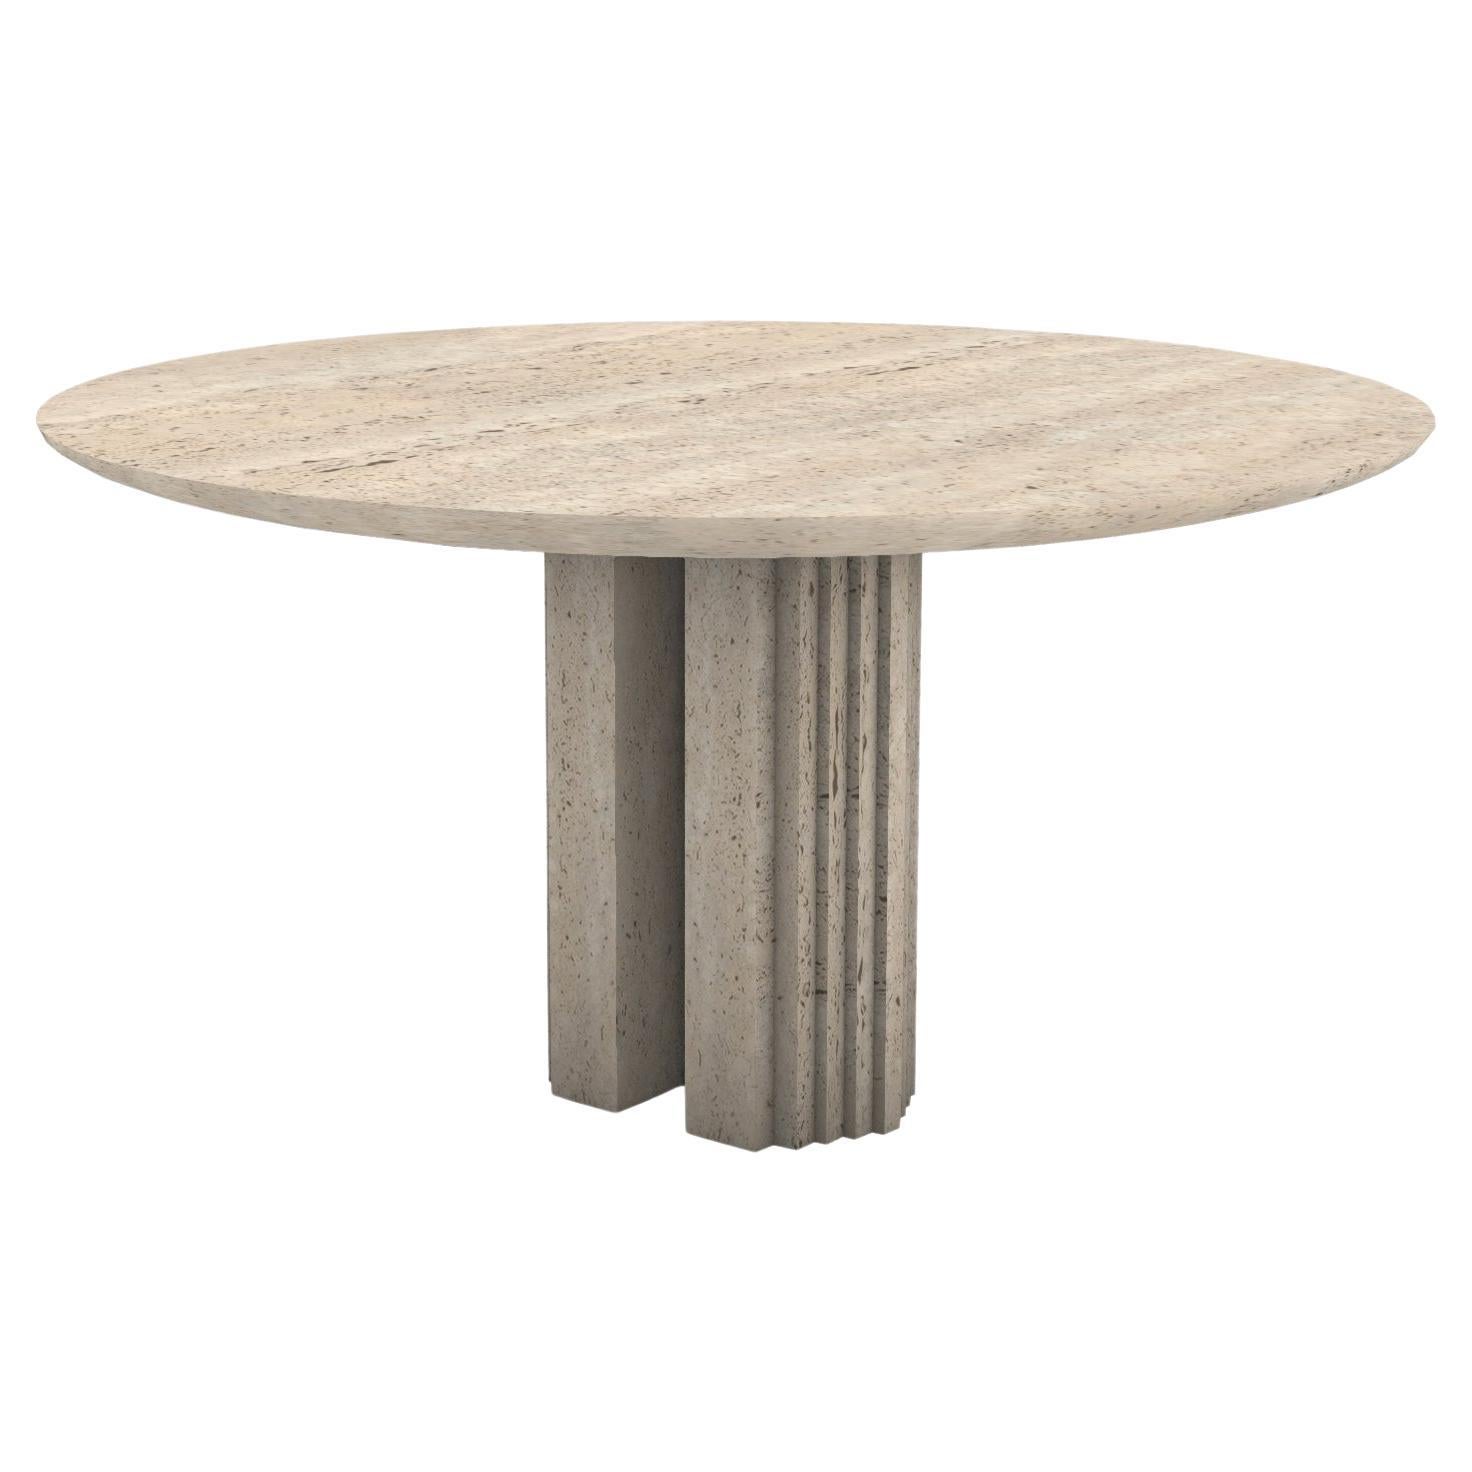 Dining table 0024c in Travertine by artist Desia Ava For Sale